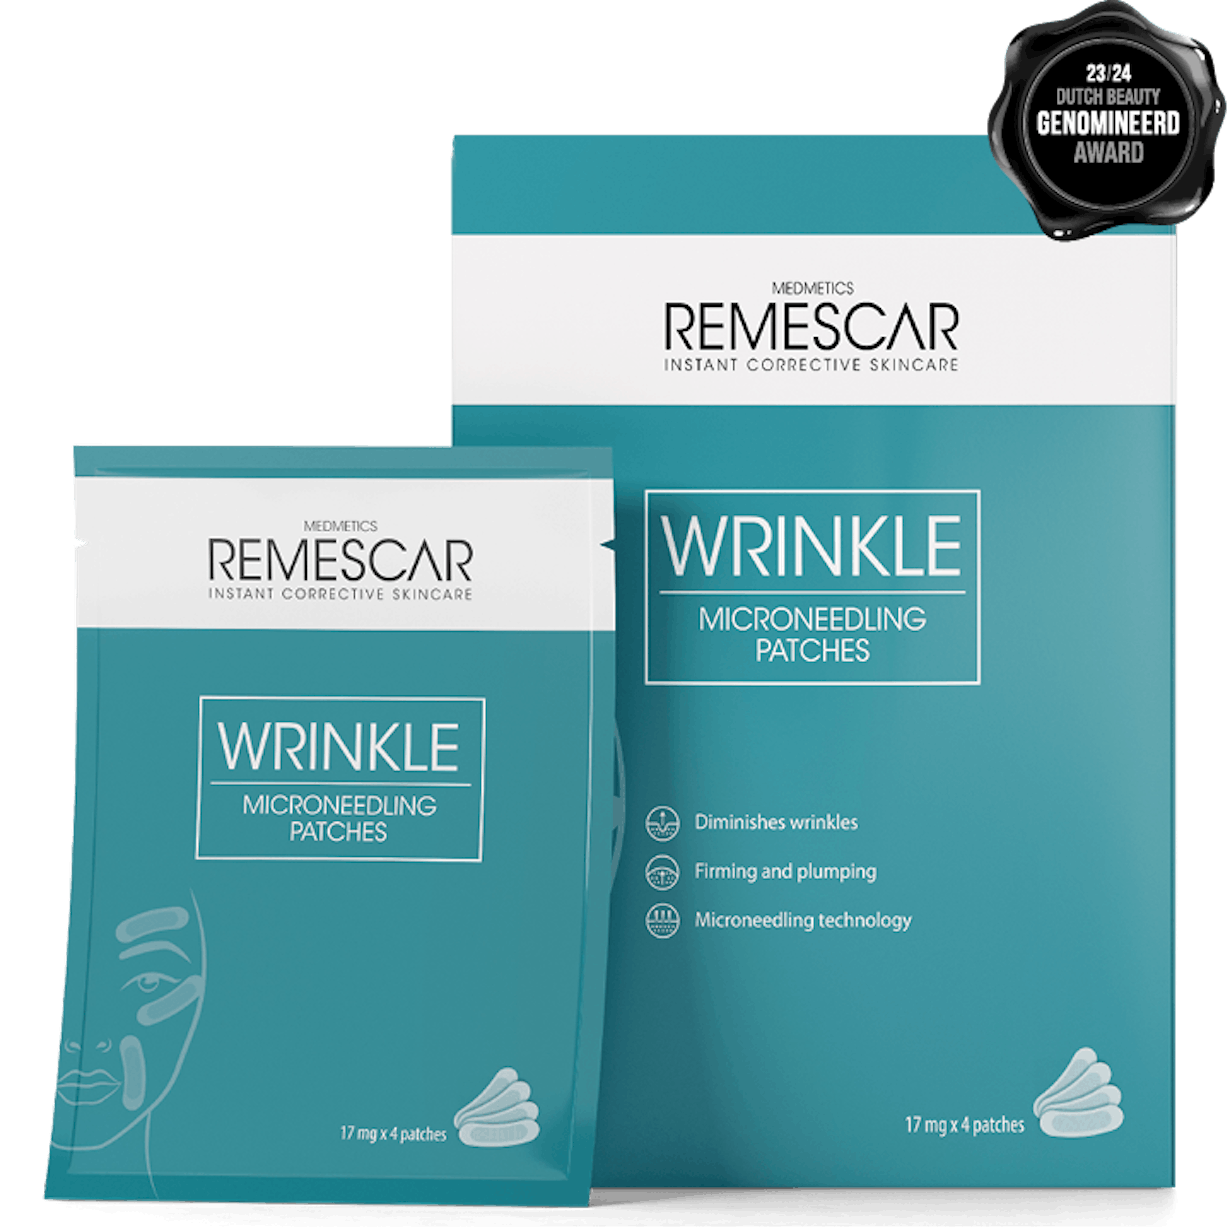 Microneedling patches Wrinkle MAIN Dutch Beauty Awards 720x720 Transparent